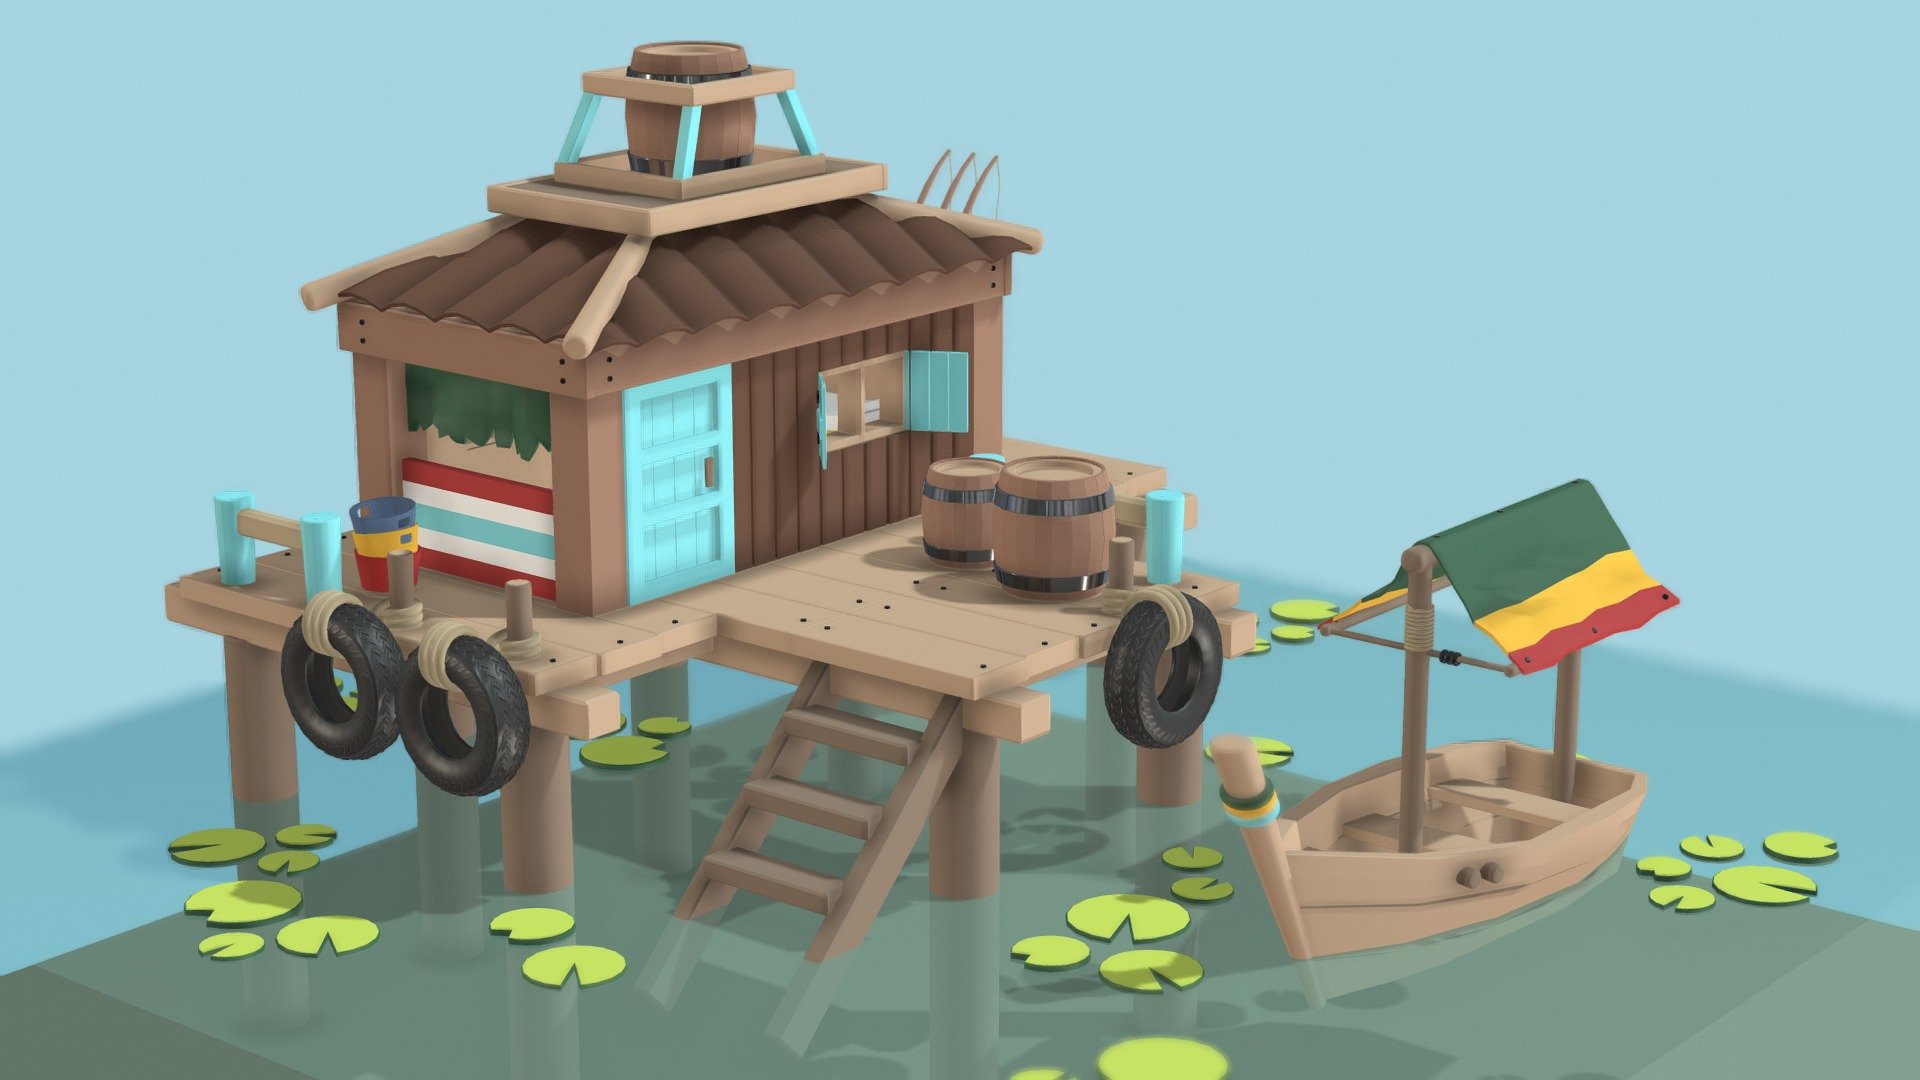 A month has passed, as I study 3D)
Don't judge too harshly) - Fish House - 3D model by KattyLi 3d model